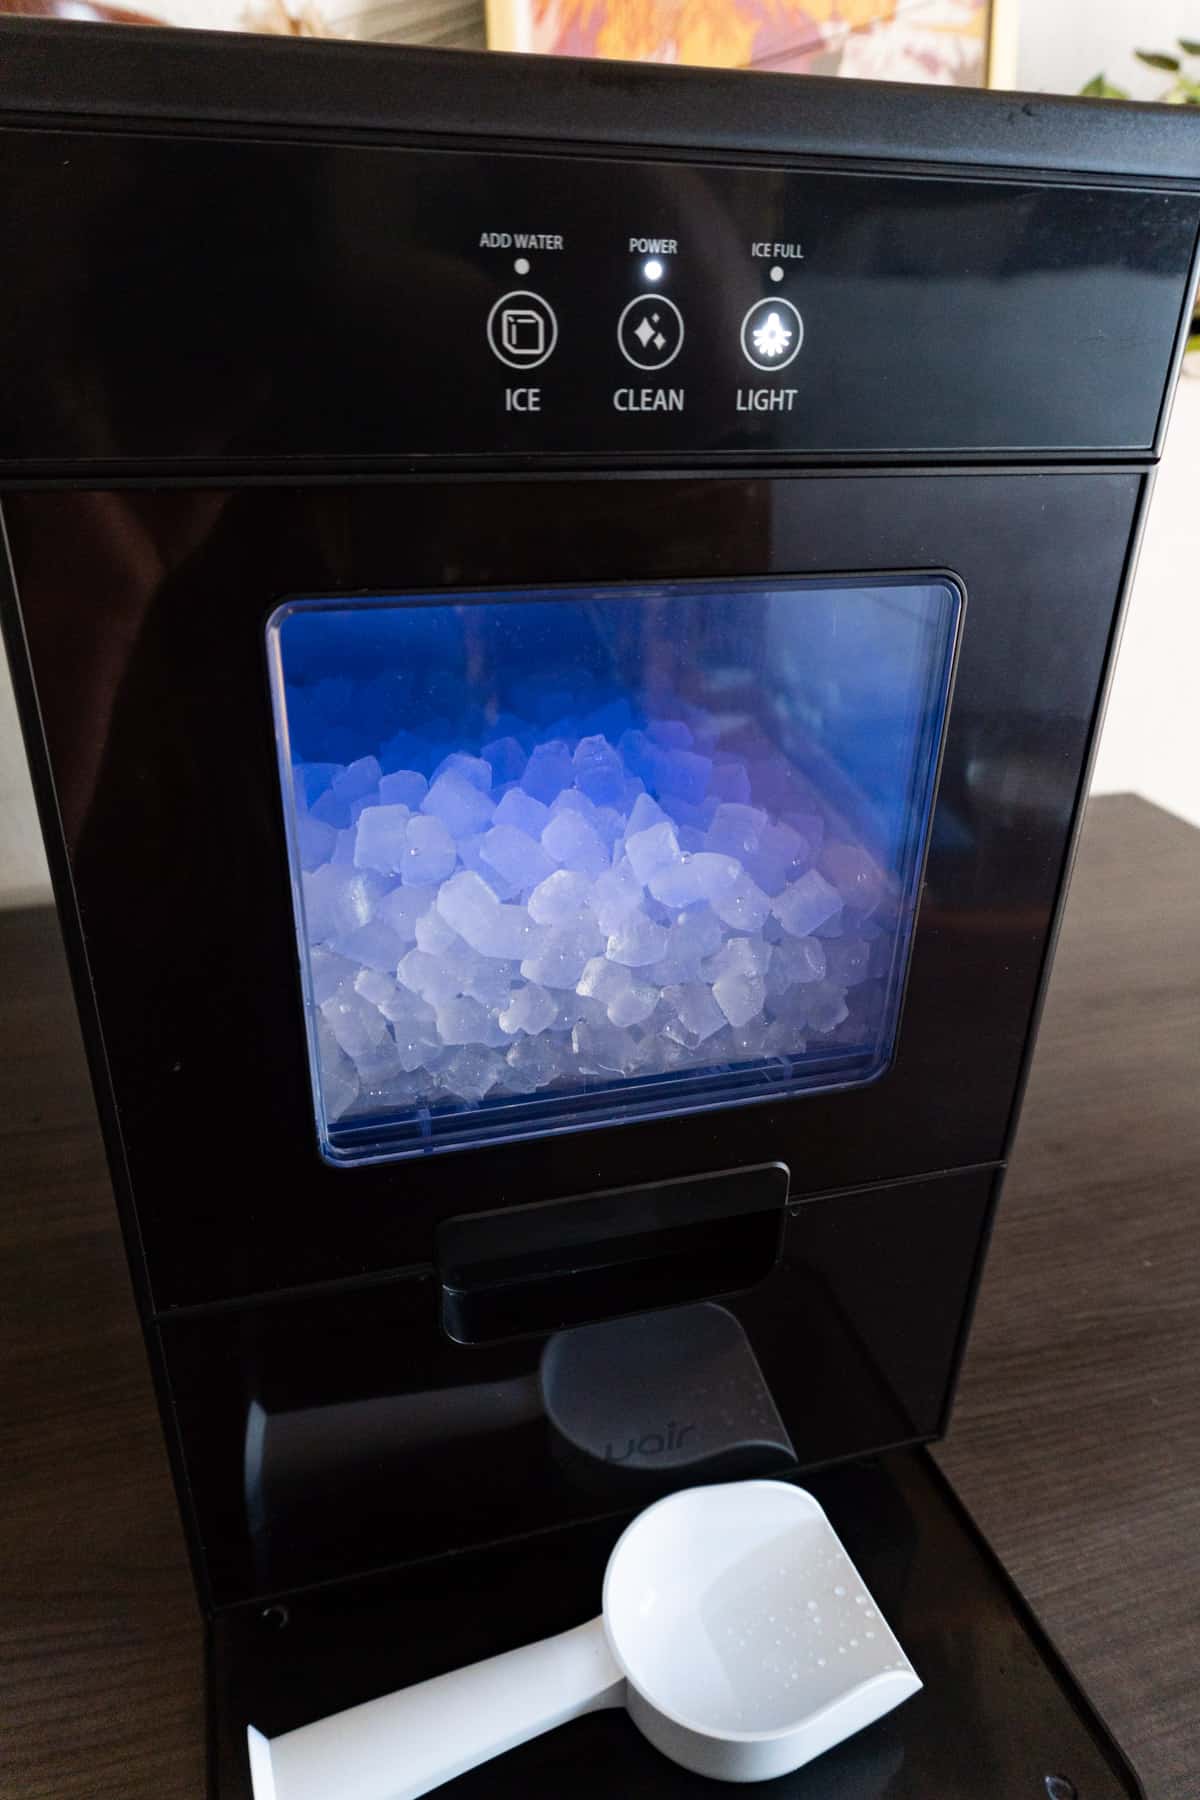 nugget ice maker with blue light on